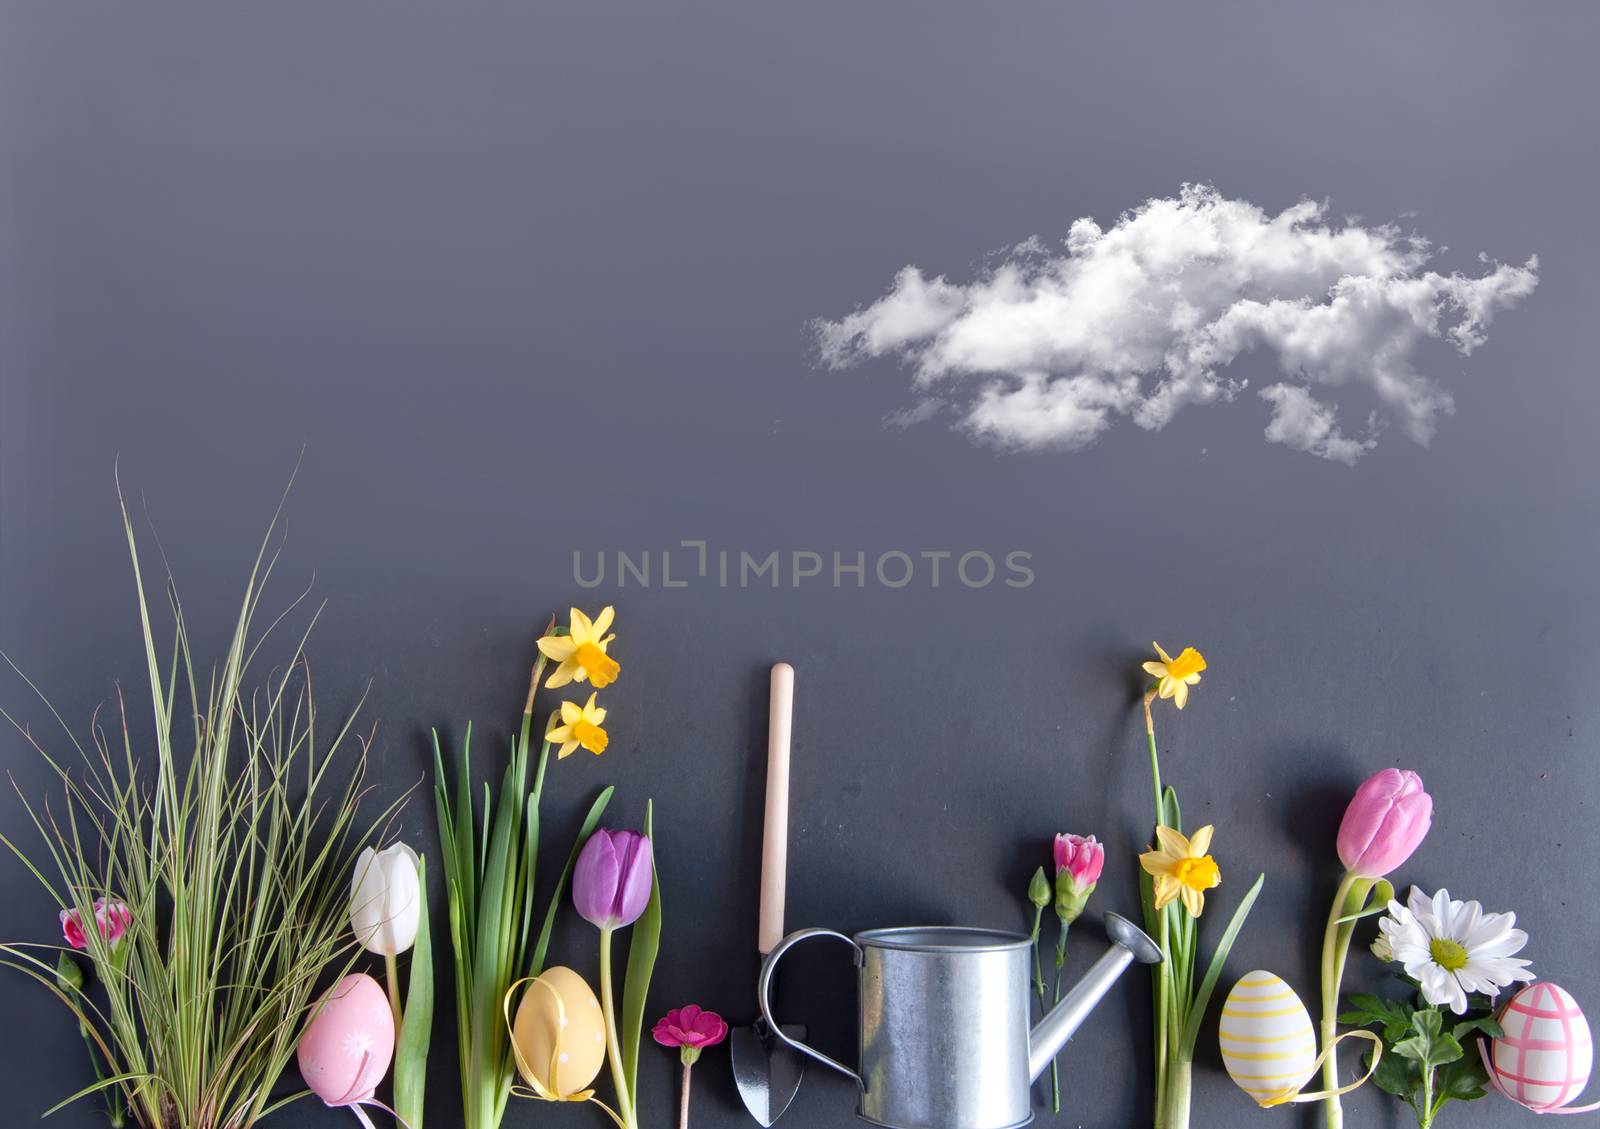 Easter flower garden background with daffodils and painted eggs laid flat on a chalkboard background